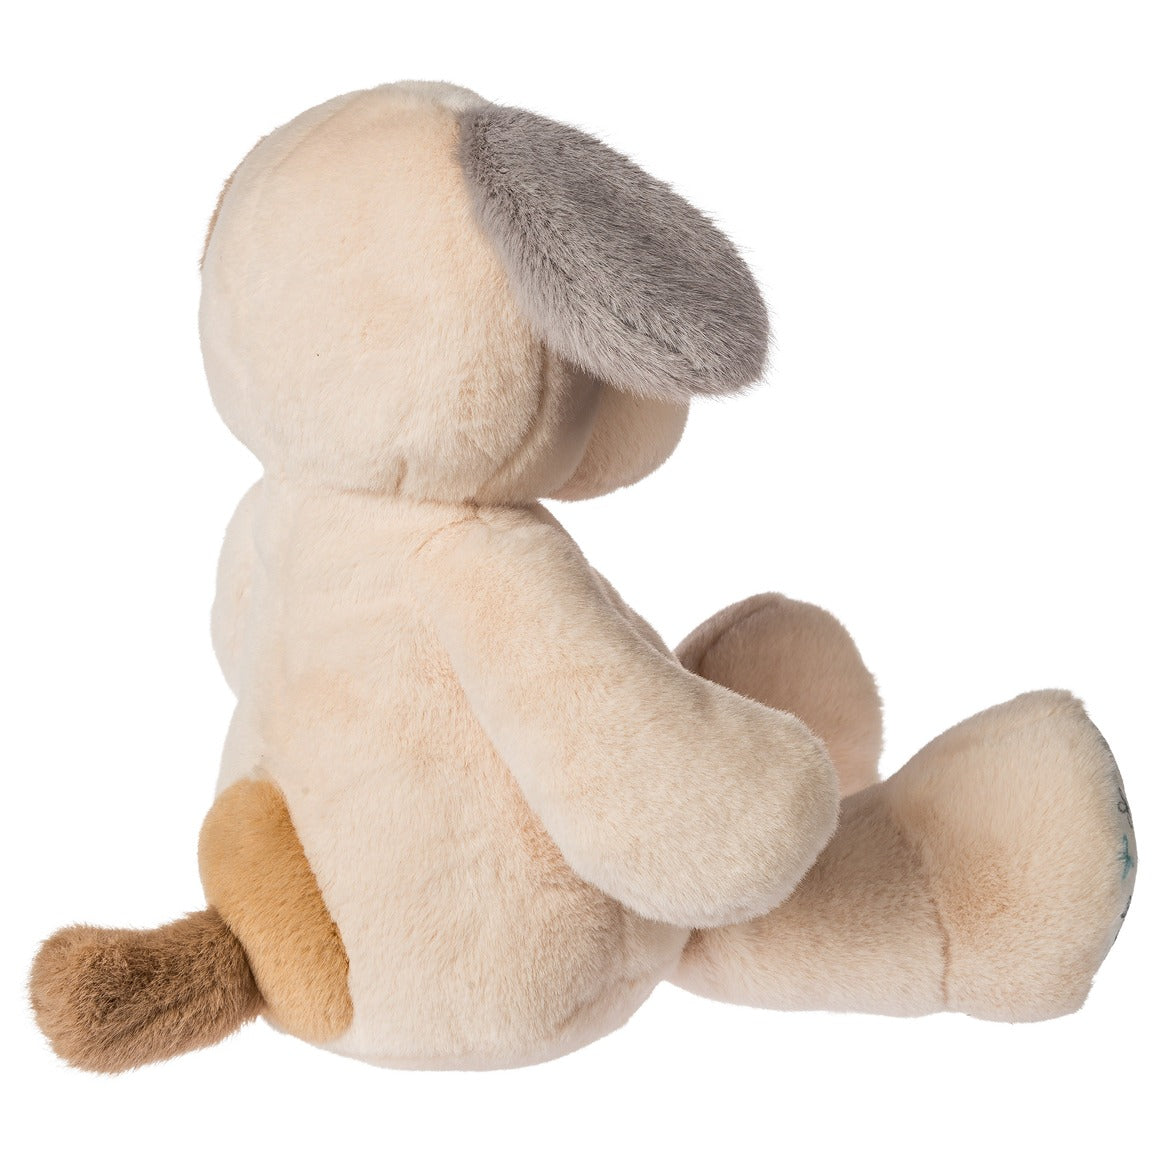 back view of the Puppy Soft Toy displayed against a white background